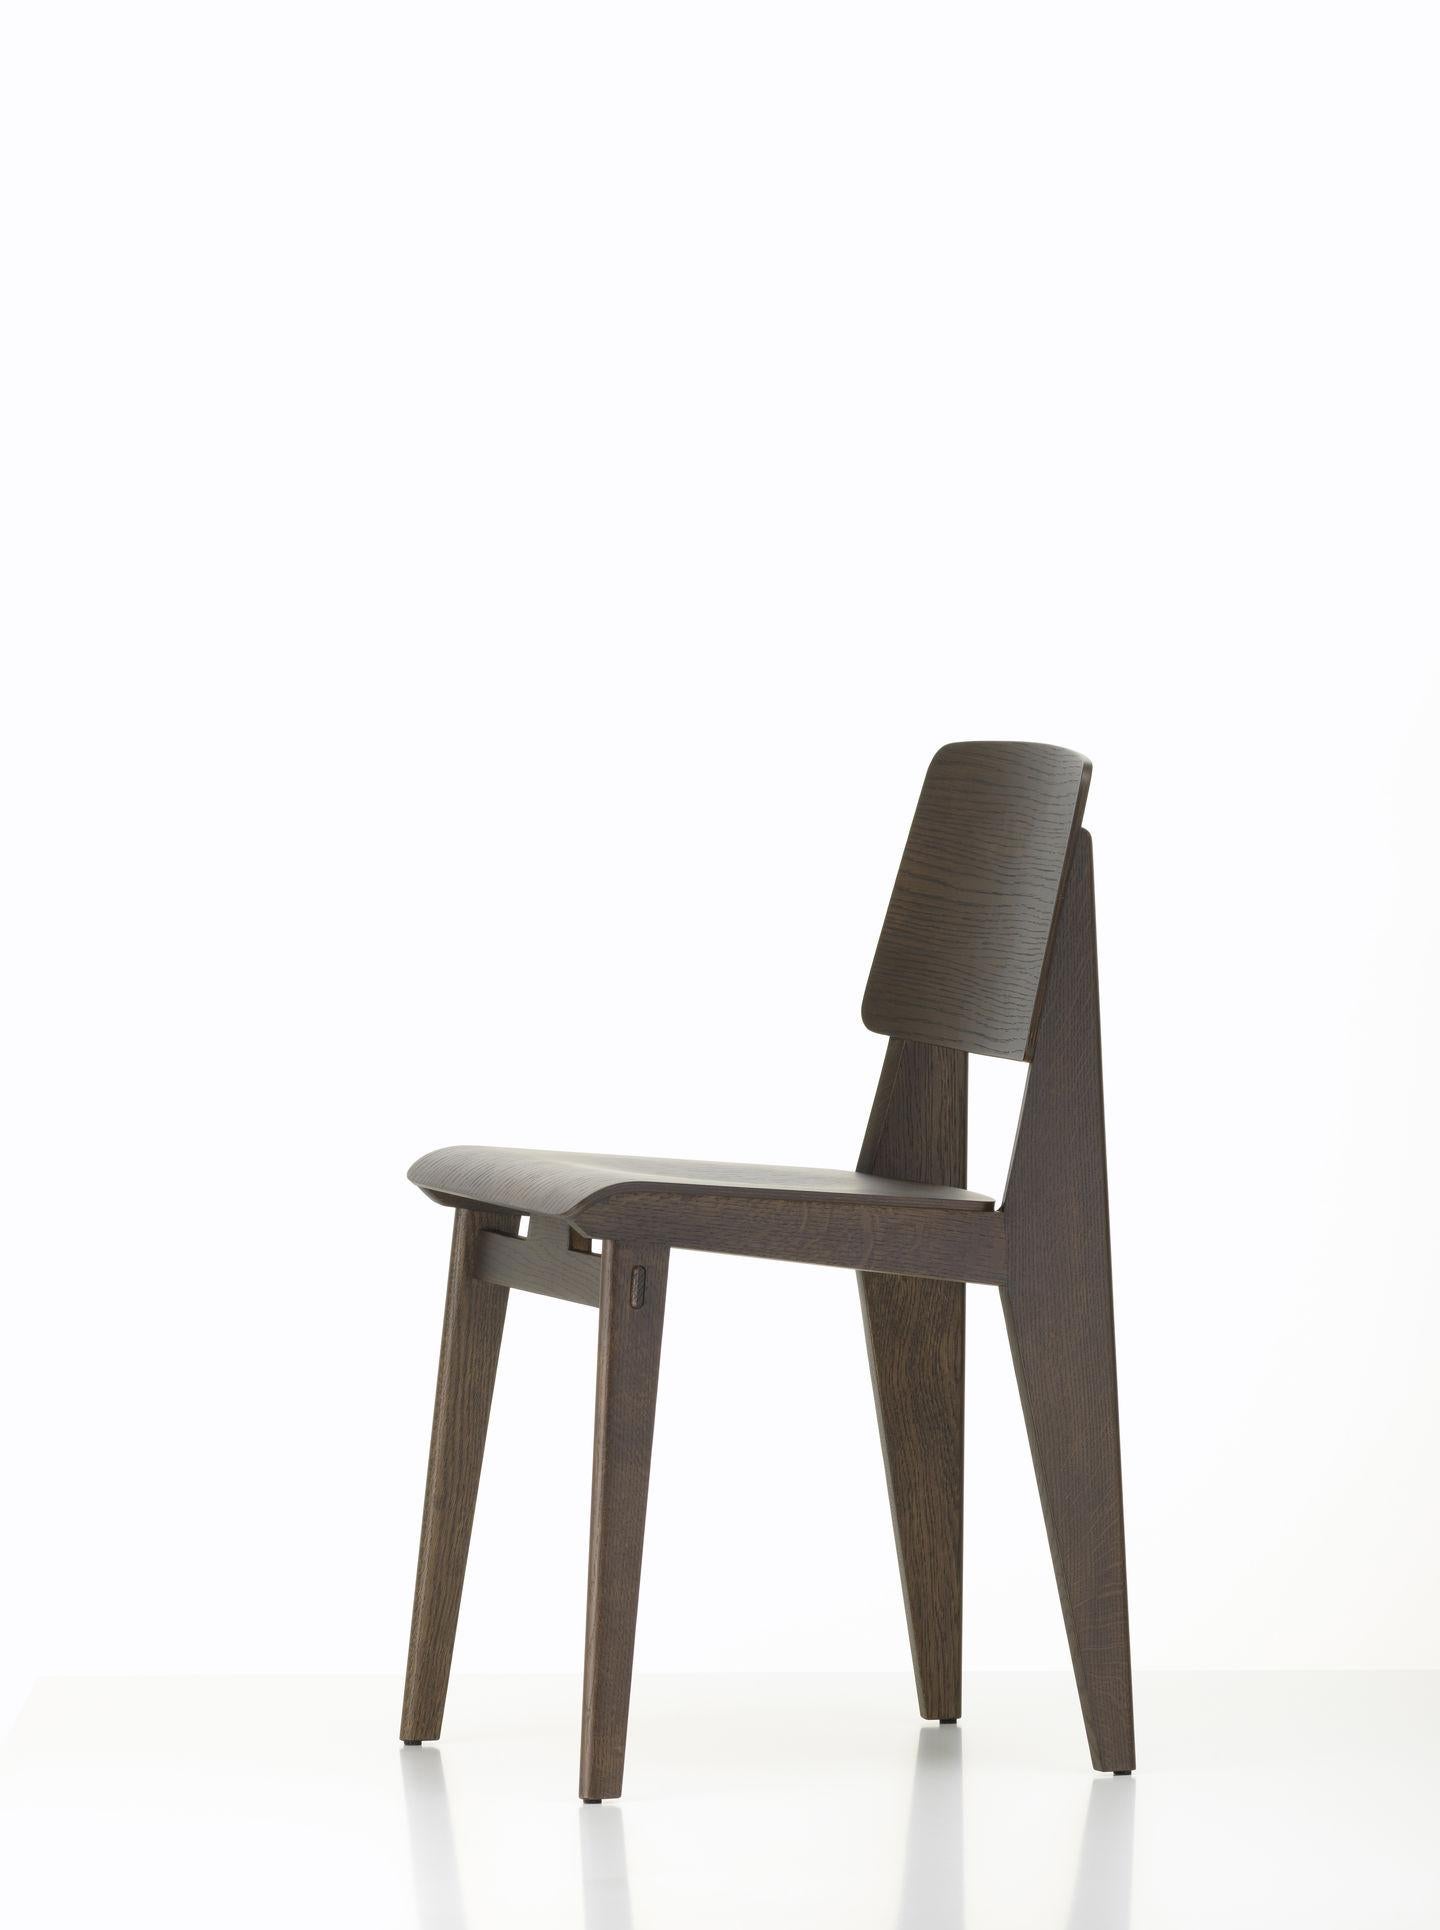 Jean Prouvé Dark-Stained Oak Chaise Tout Bois Chair by Vitra 4